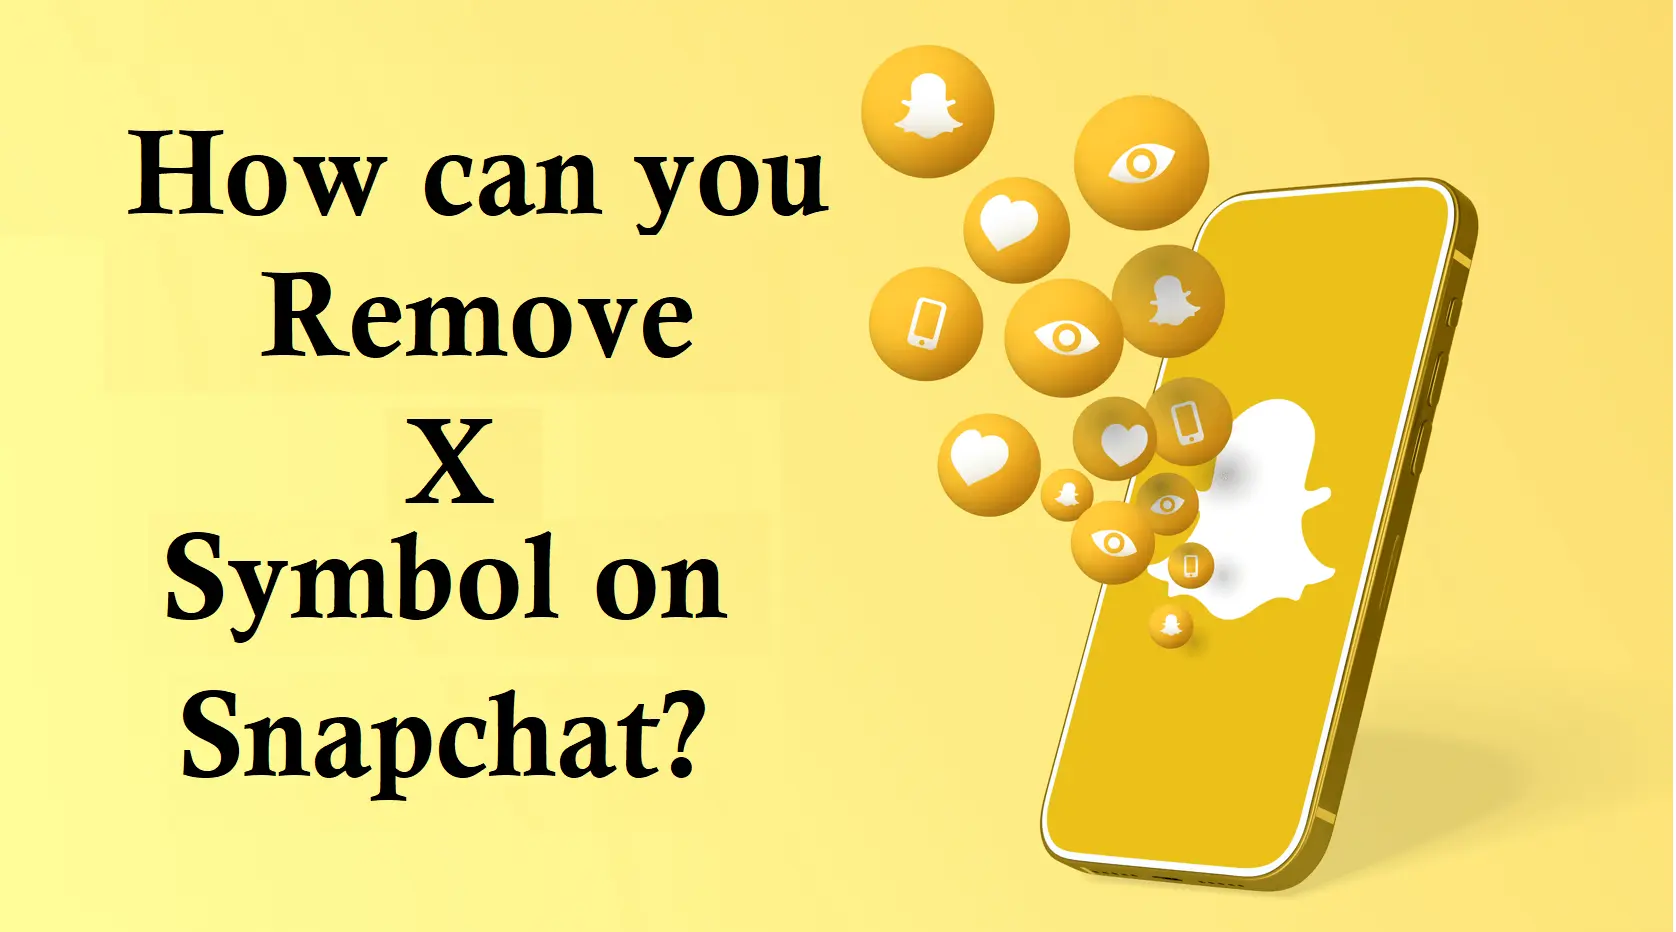 how can you remove symbol x on snapchat